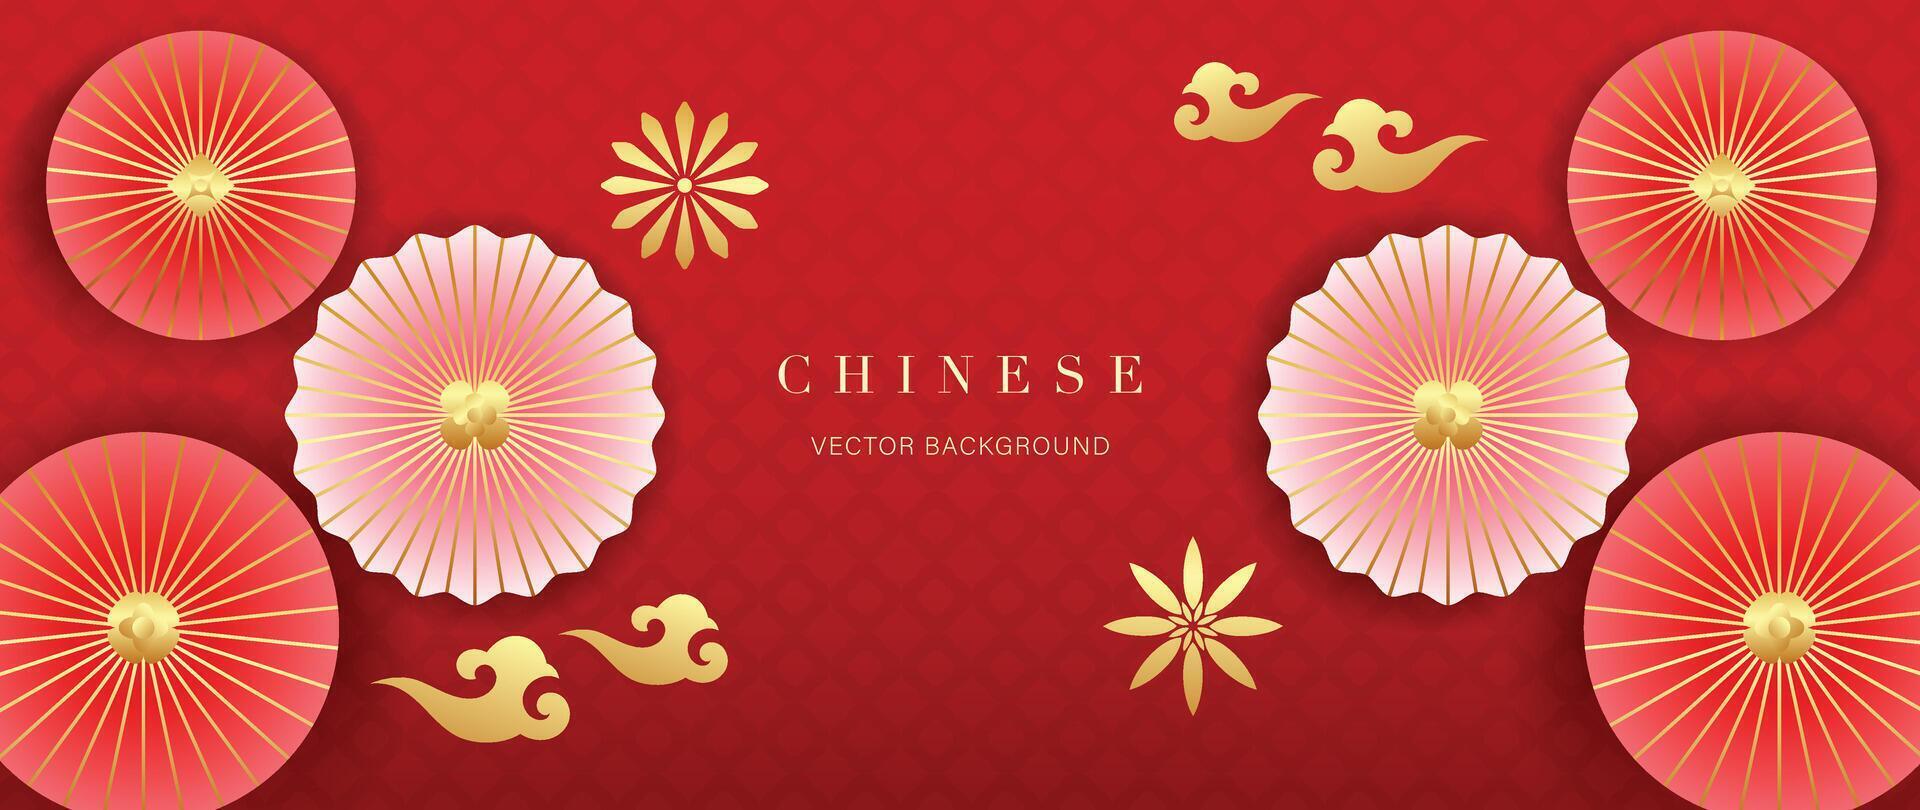 Happy Chinese new year backdrop vector. Wallpaper design with chinese pattern, flower, cloud on red background. Modern luxury oriental illustration for cover, banner, website, decor, border, frame. vector